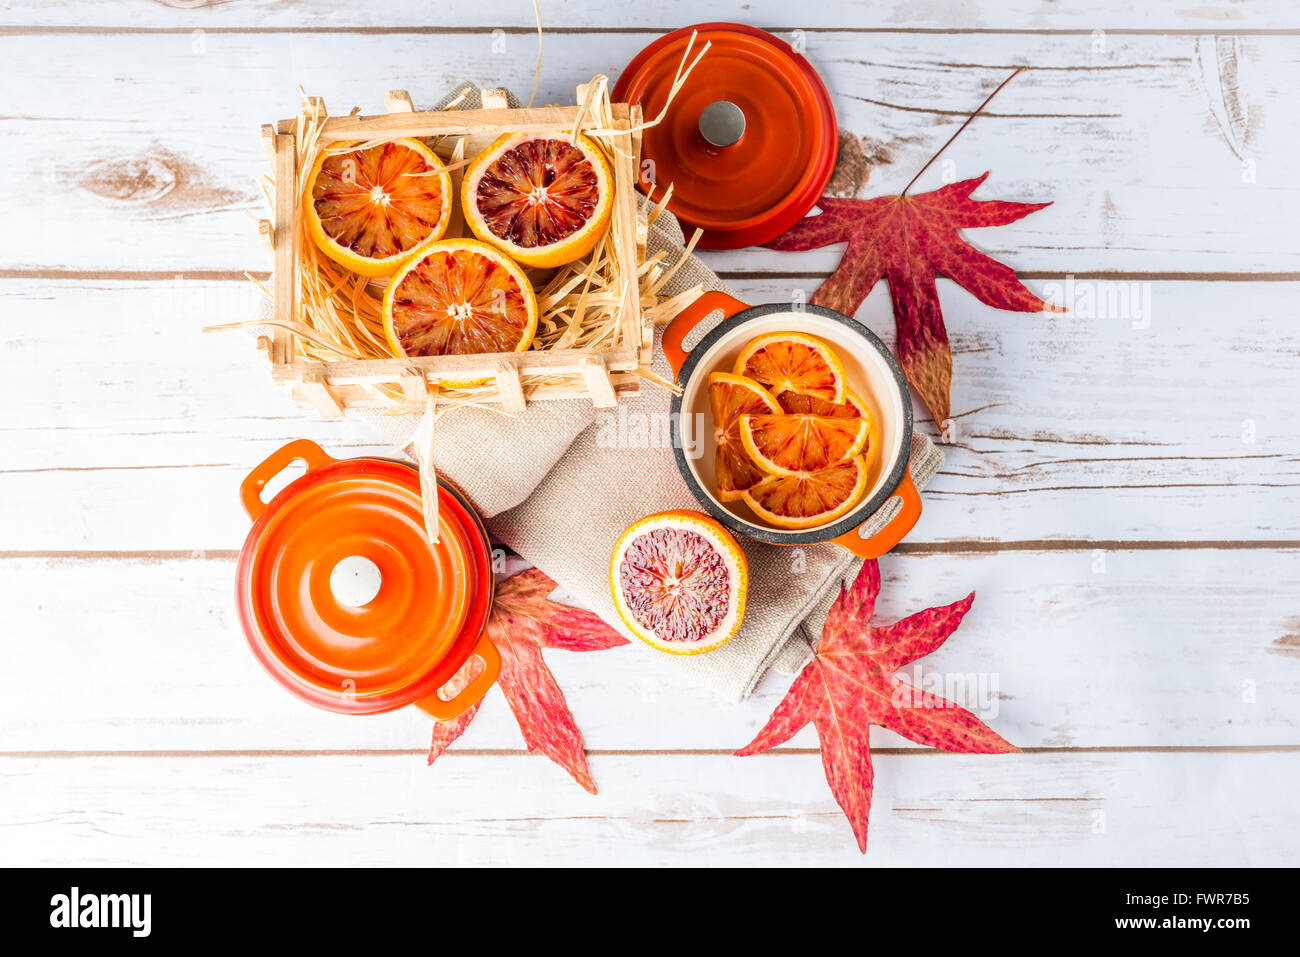 Blood oranges sliced on plates with orange cast iron pots and autumn leaves Stock Photo